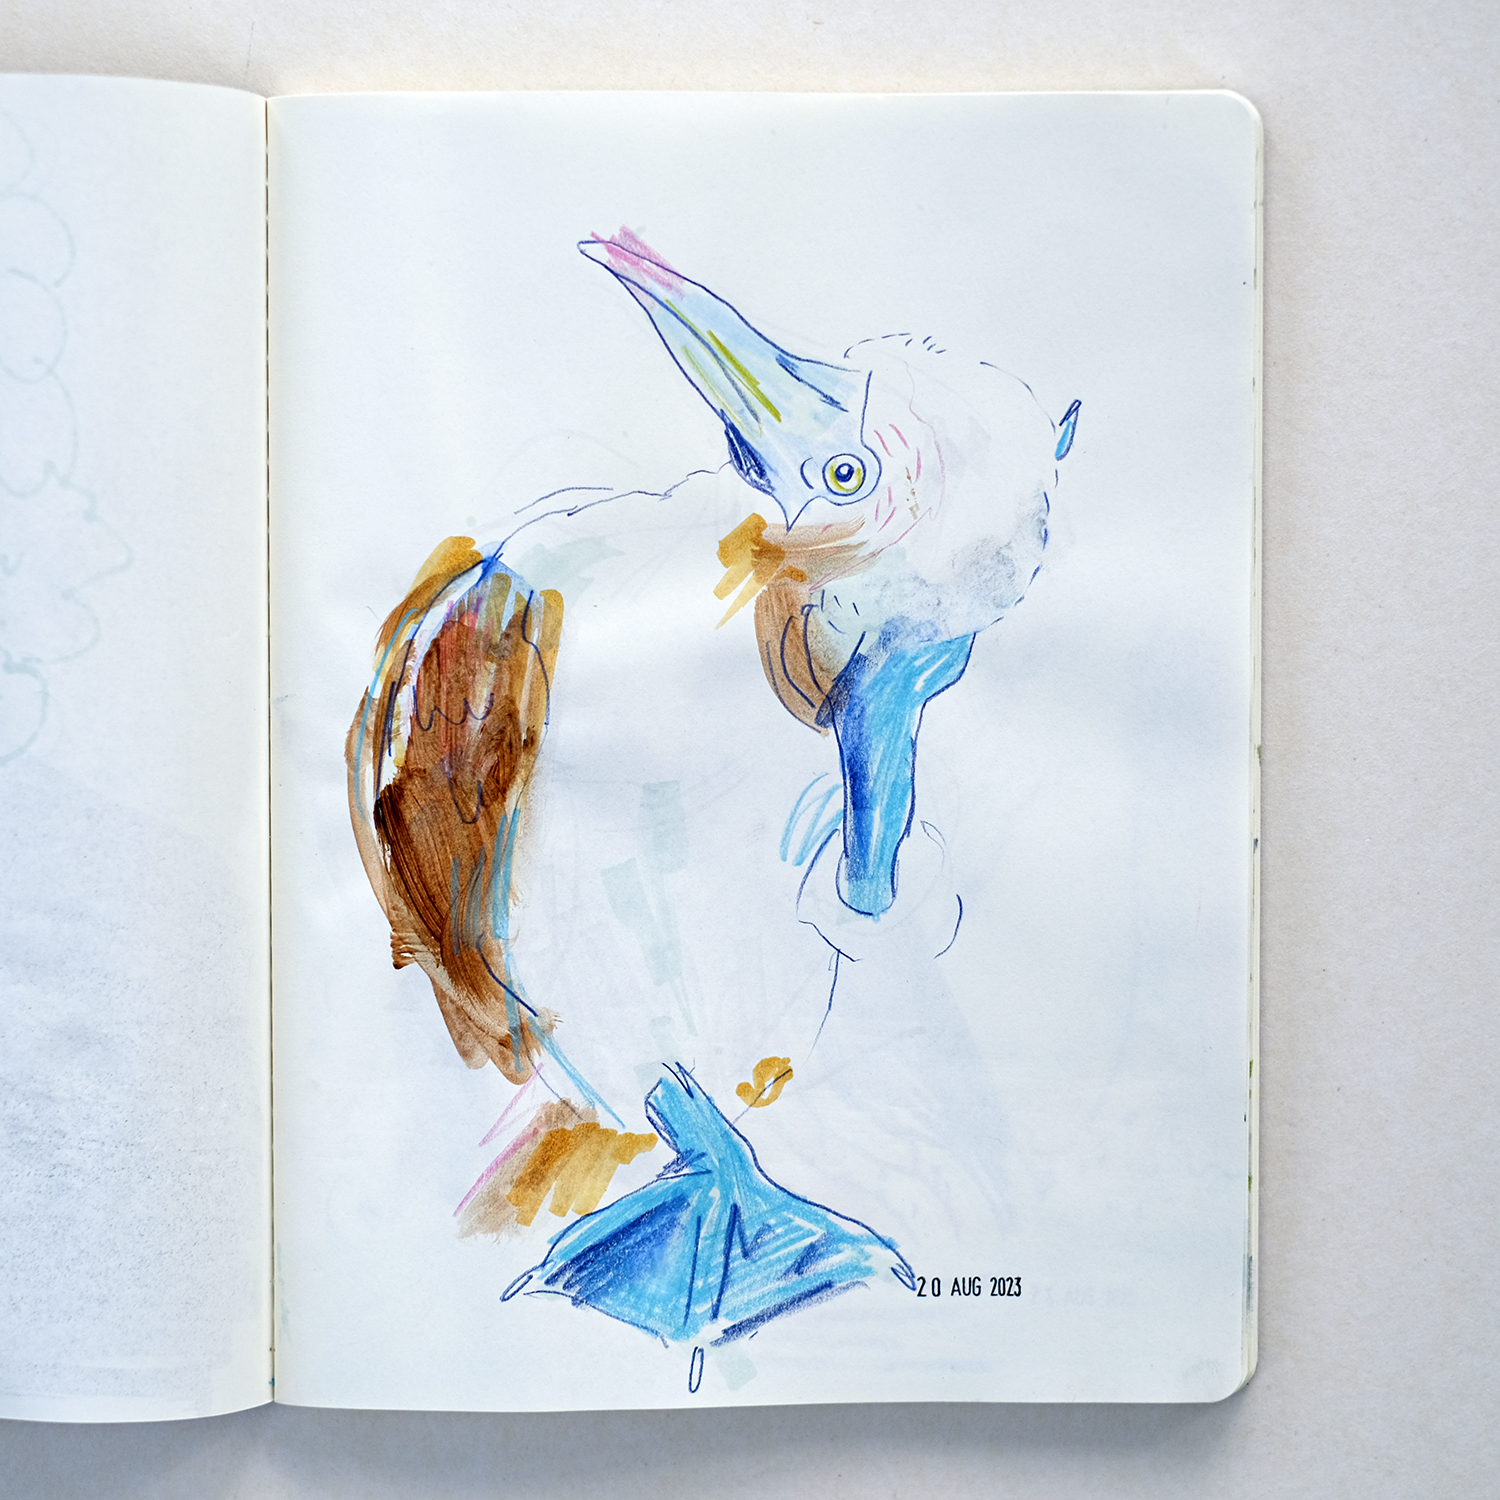 Blue footed booby, Illustrator's sketchbook, Moleskine and Royal Talens sketchbooks, mixed media sketches, www.Fenne.be